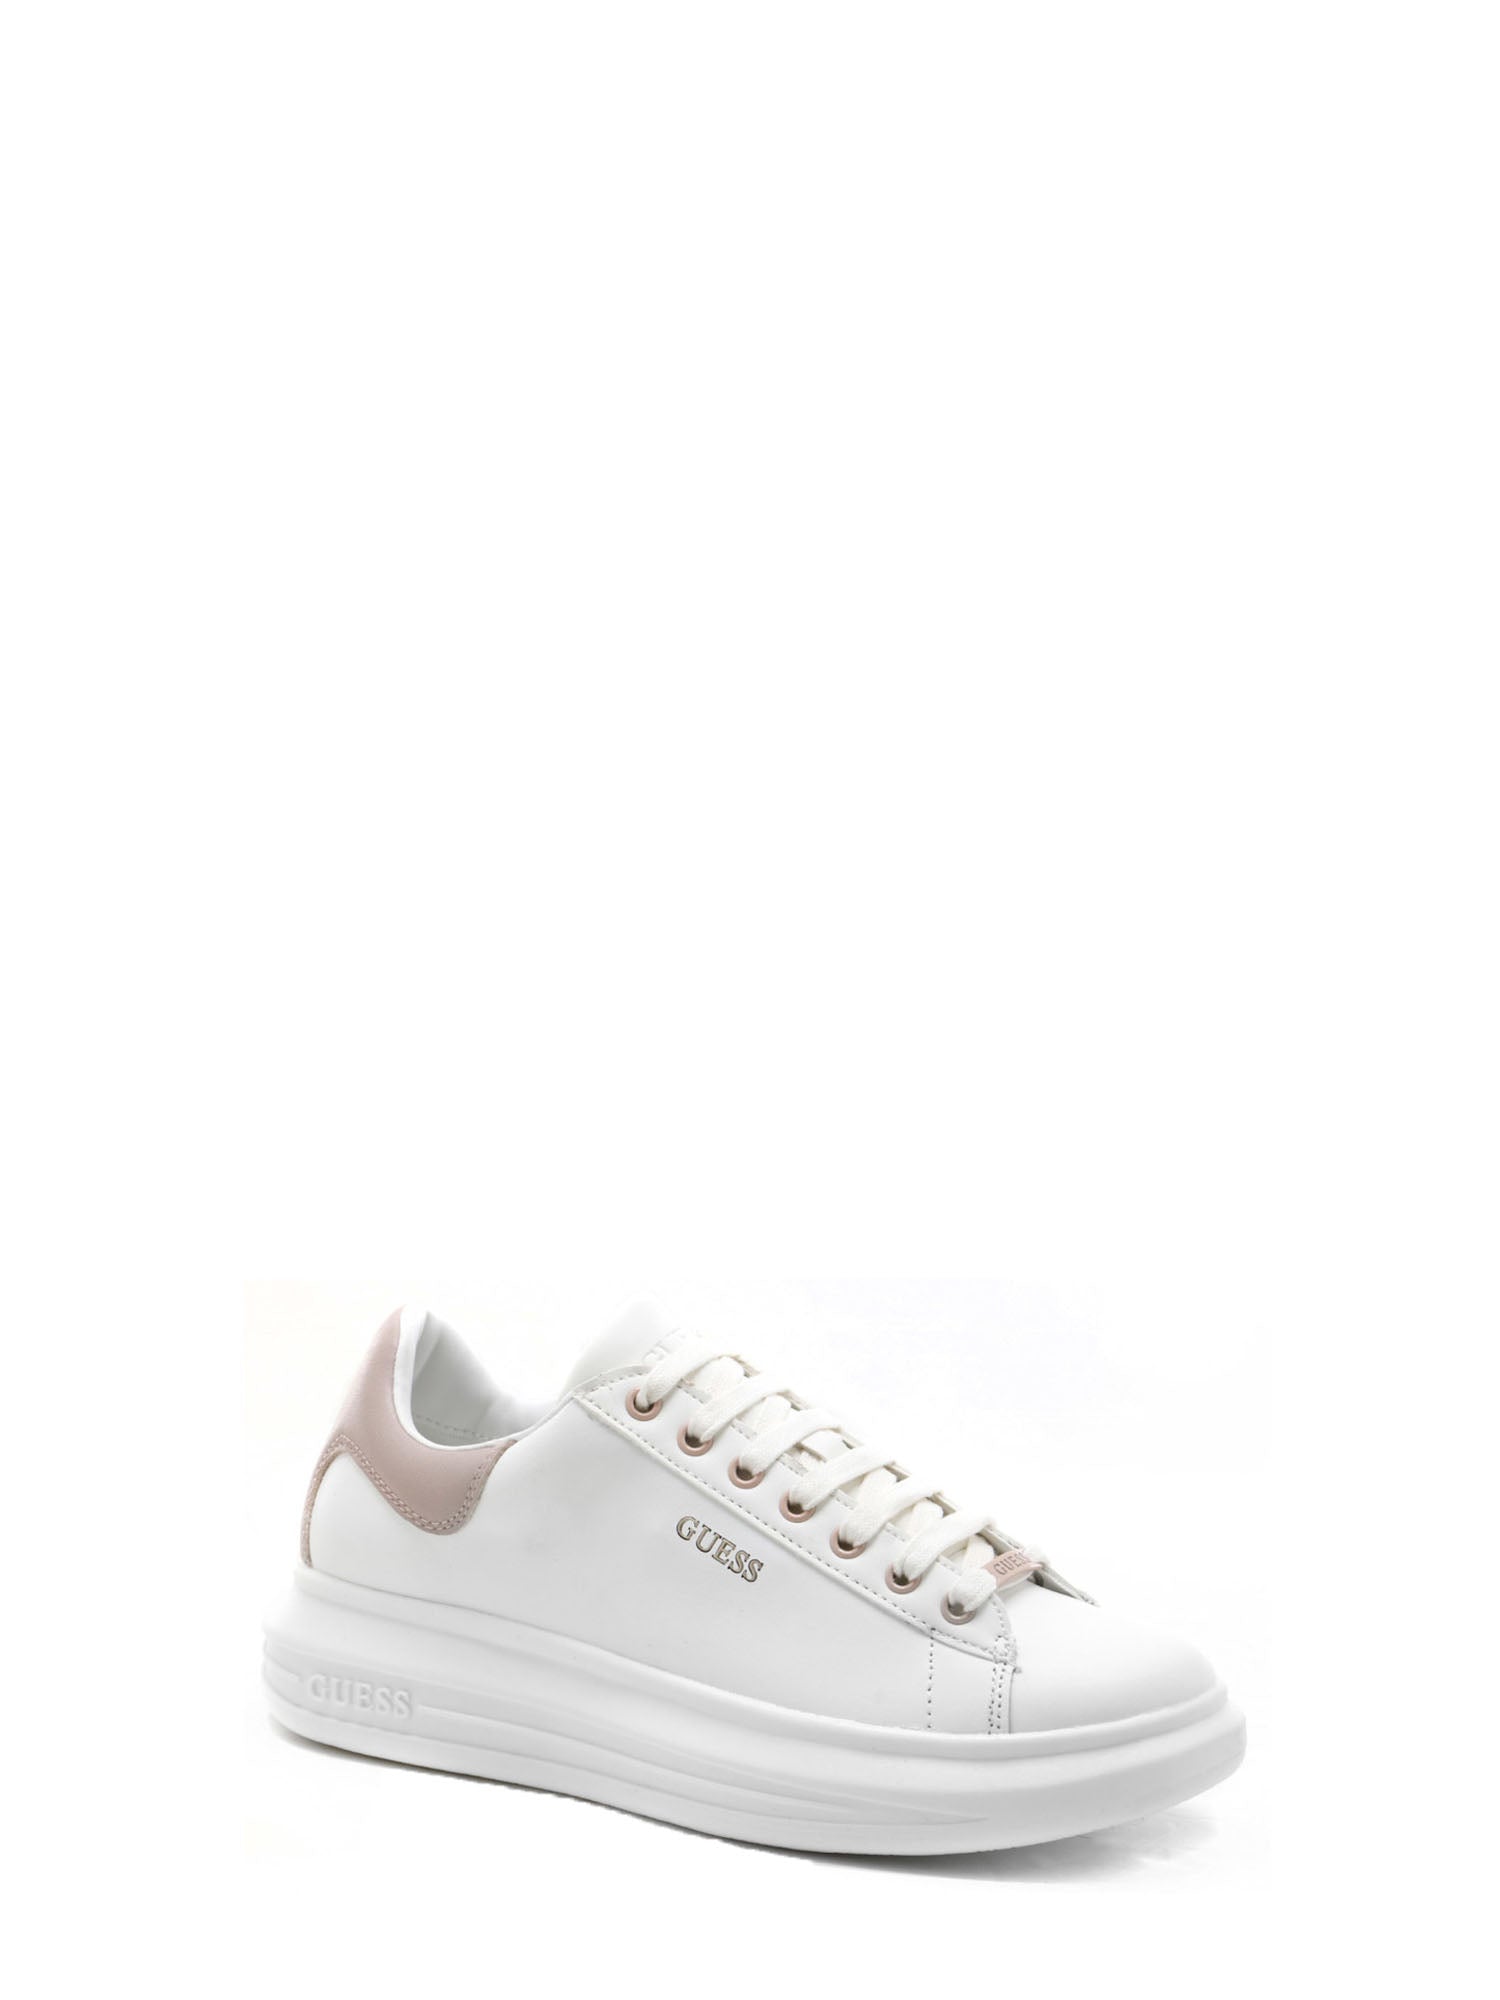 GUESS JEANS SNEAKERS SALERNO BIANCO - ROSA